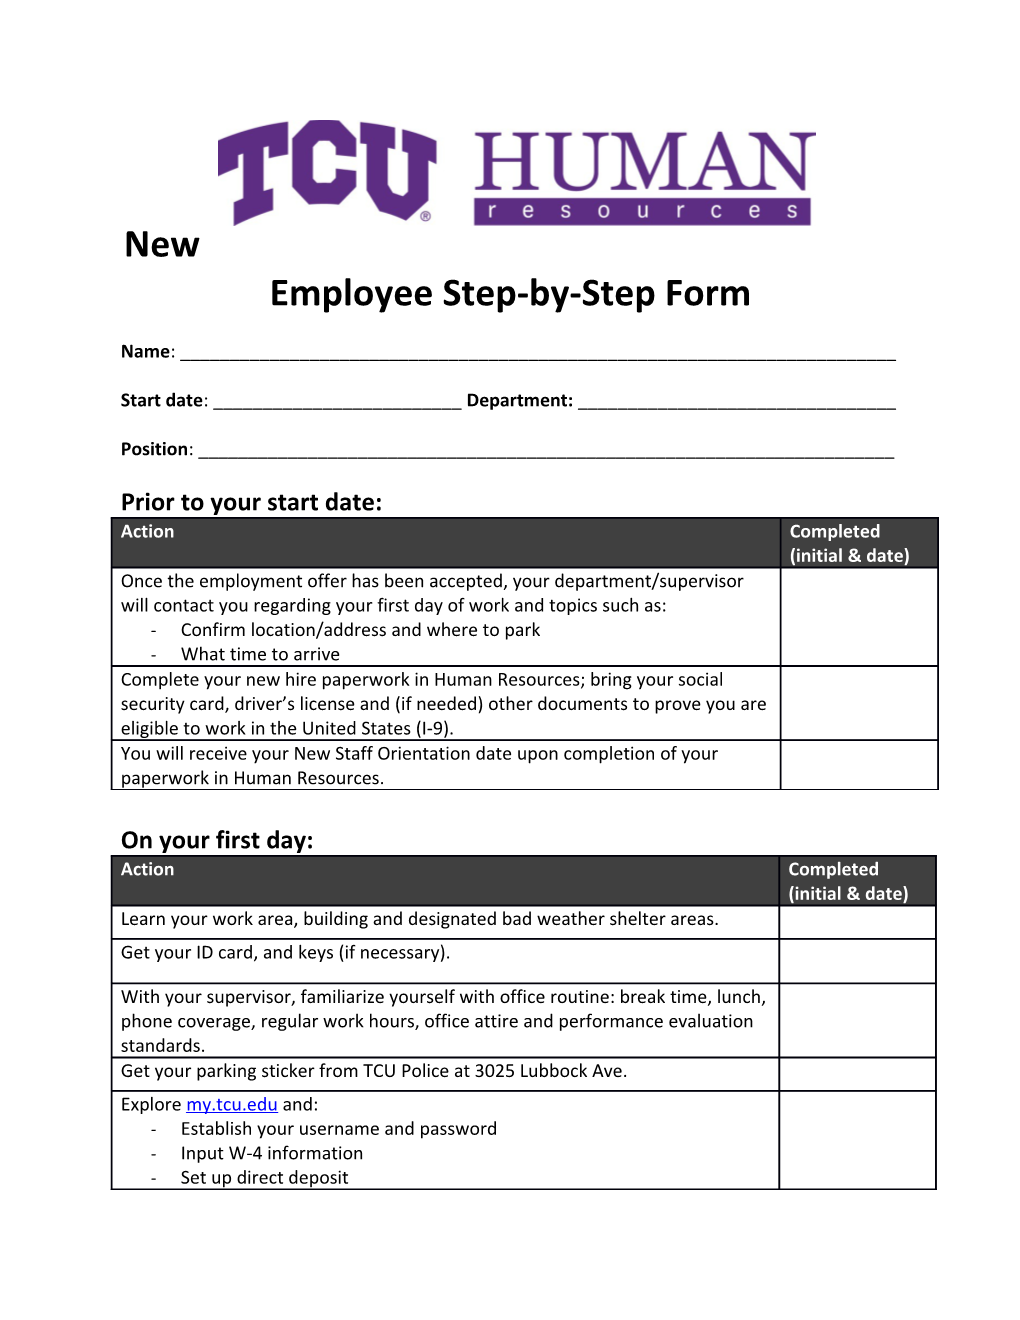 New Employee Step-By-Step Form